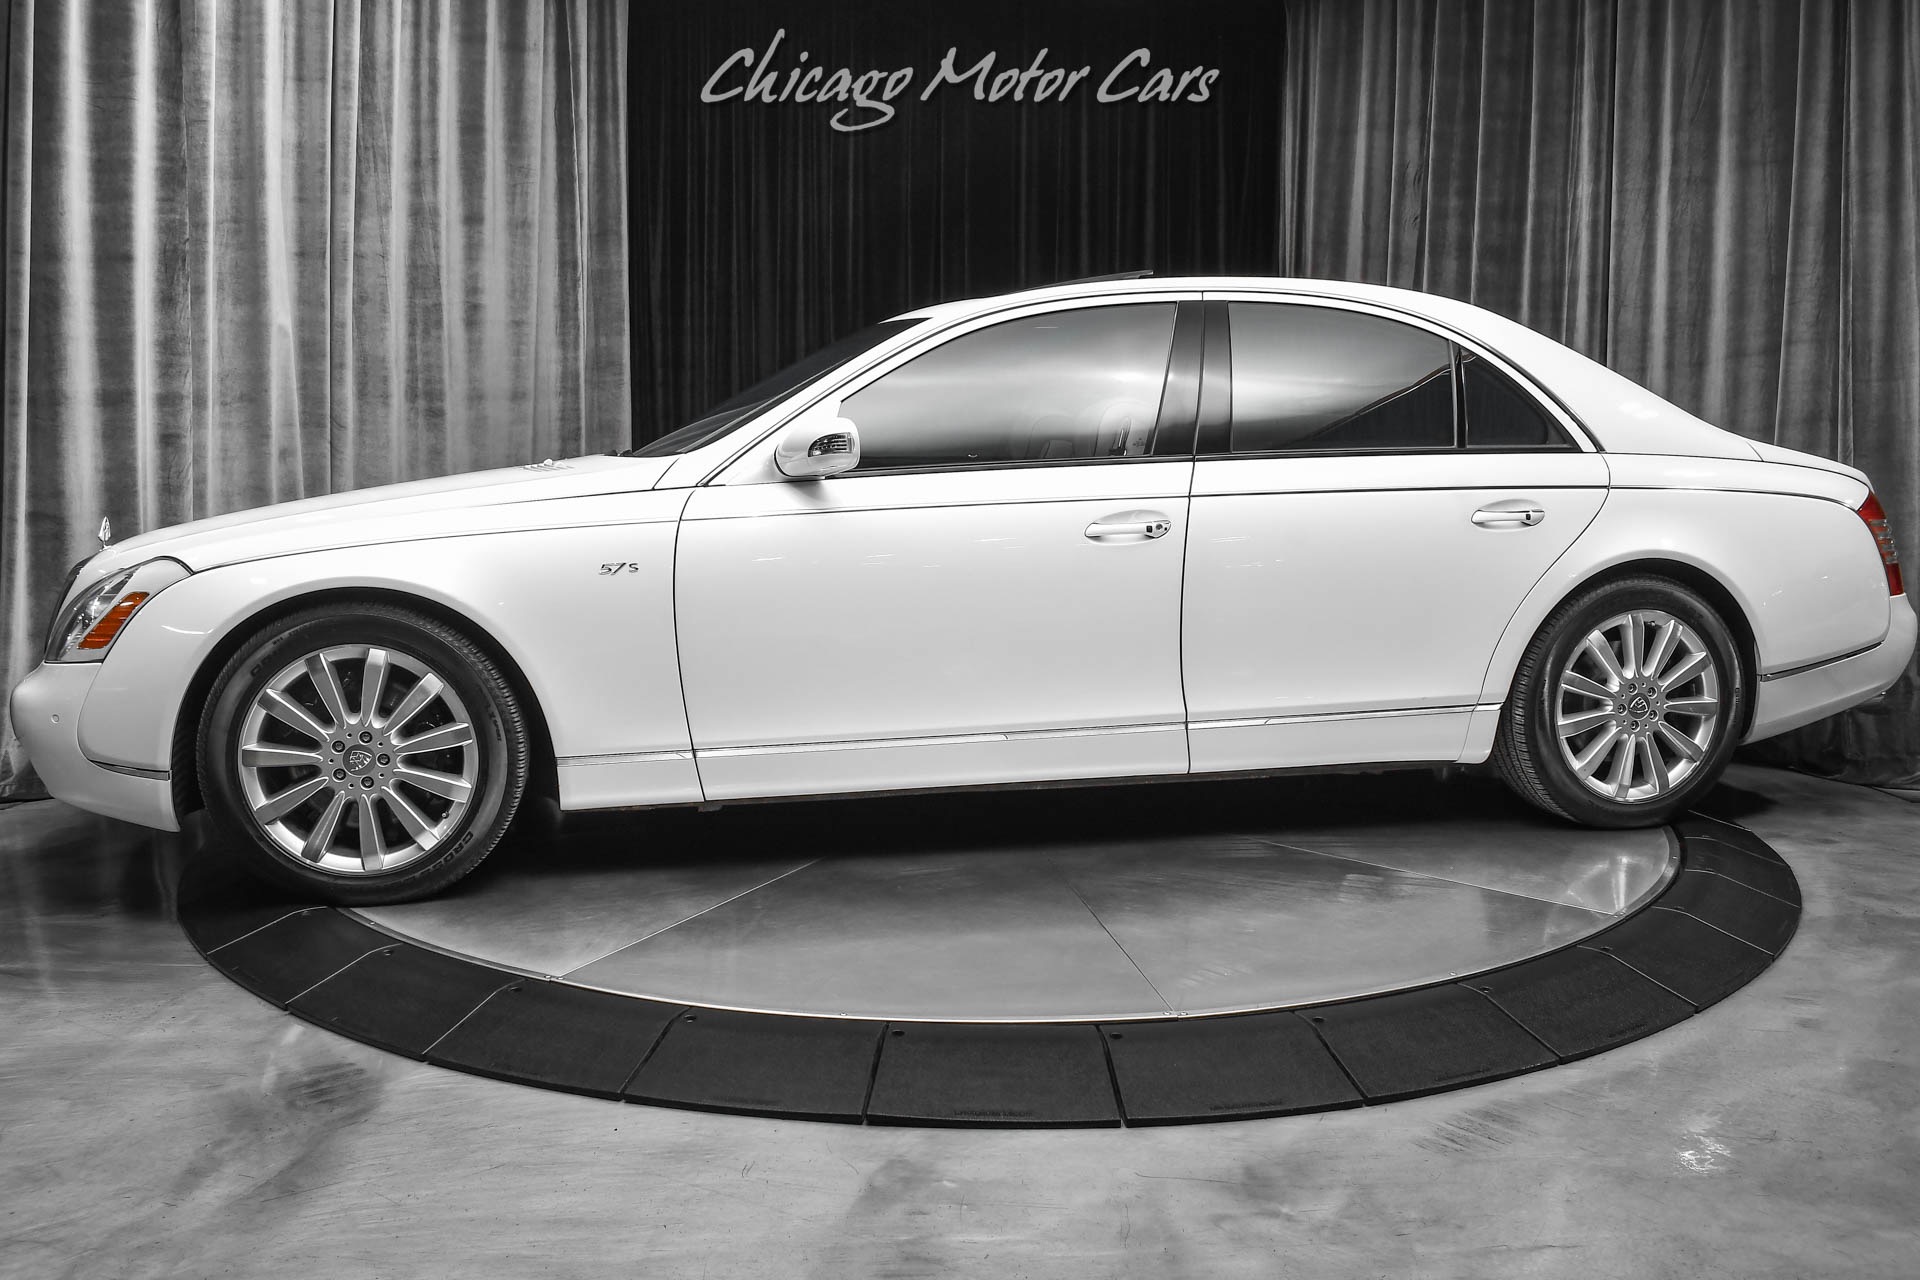 Used-2007-Maybach-57-S-RARE-White-on-White-PINNACLE-of-Luxury-MSRP-375K-Carbon-Trim